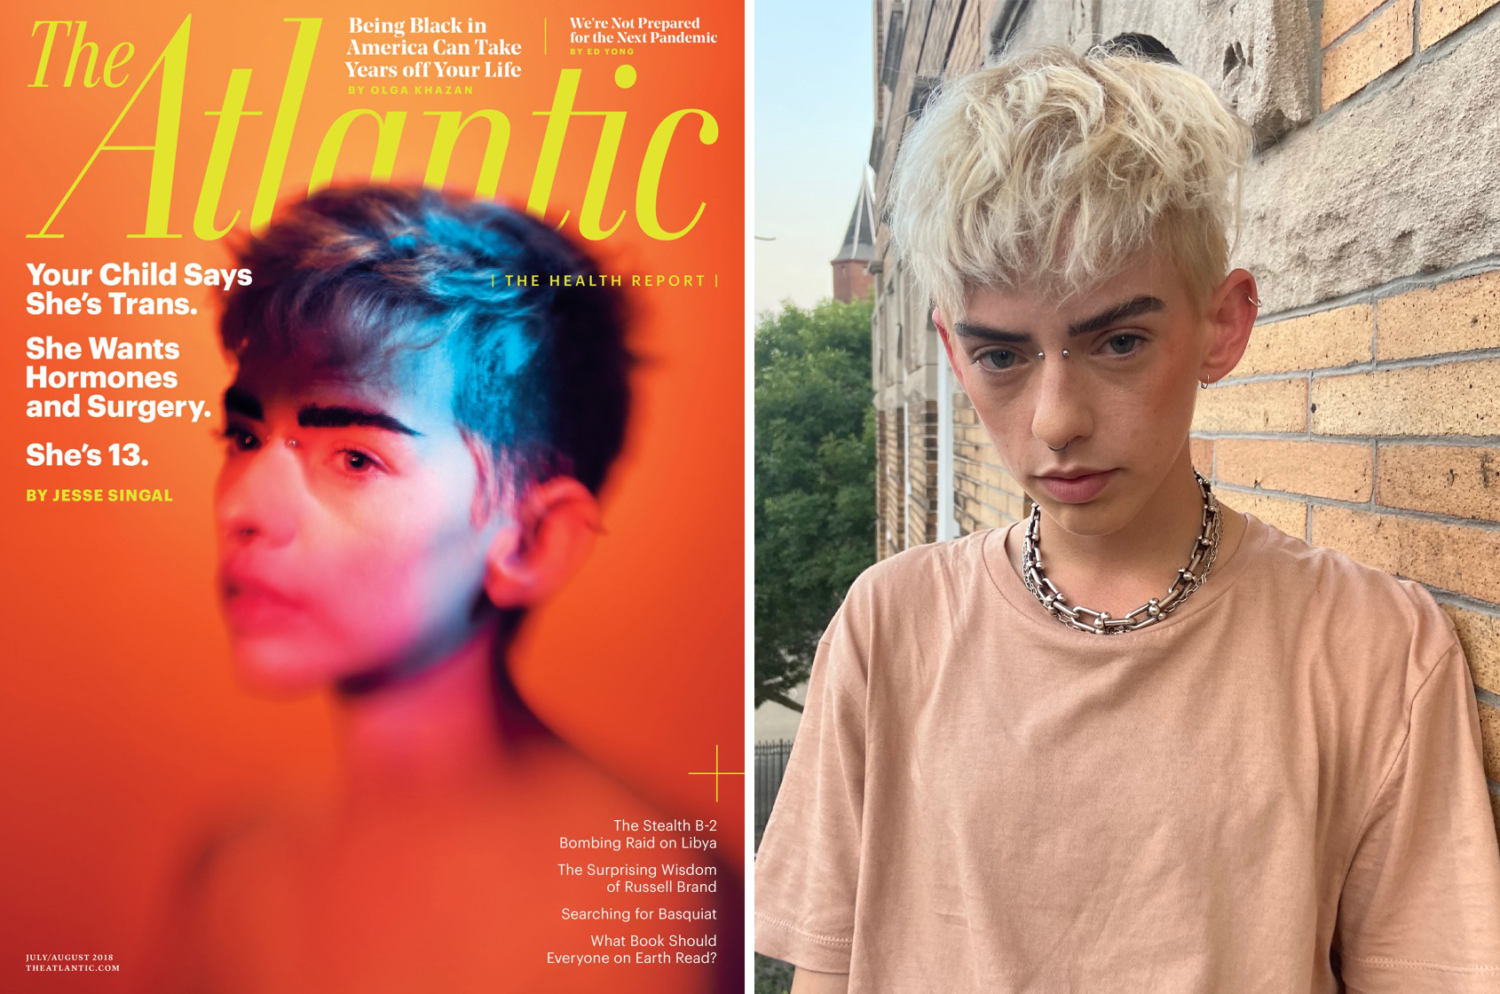 The Atlantic tried to artistically show gender dysphoria on its cover. Instead it damaged the trust of transgender readers. – Poynter